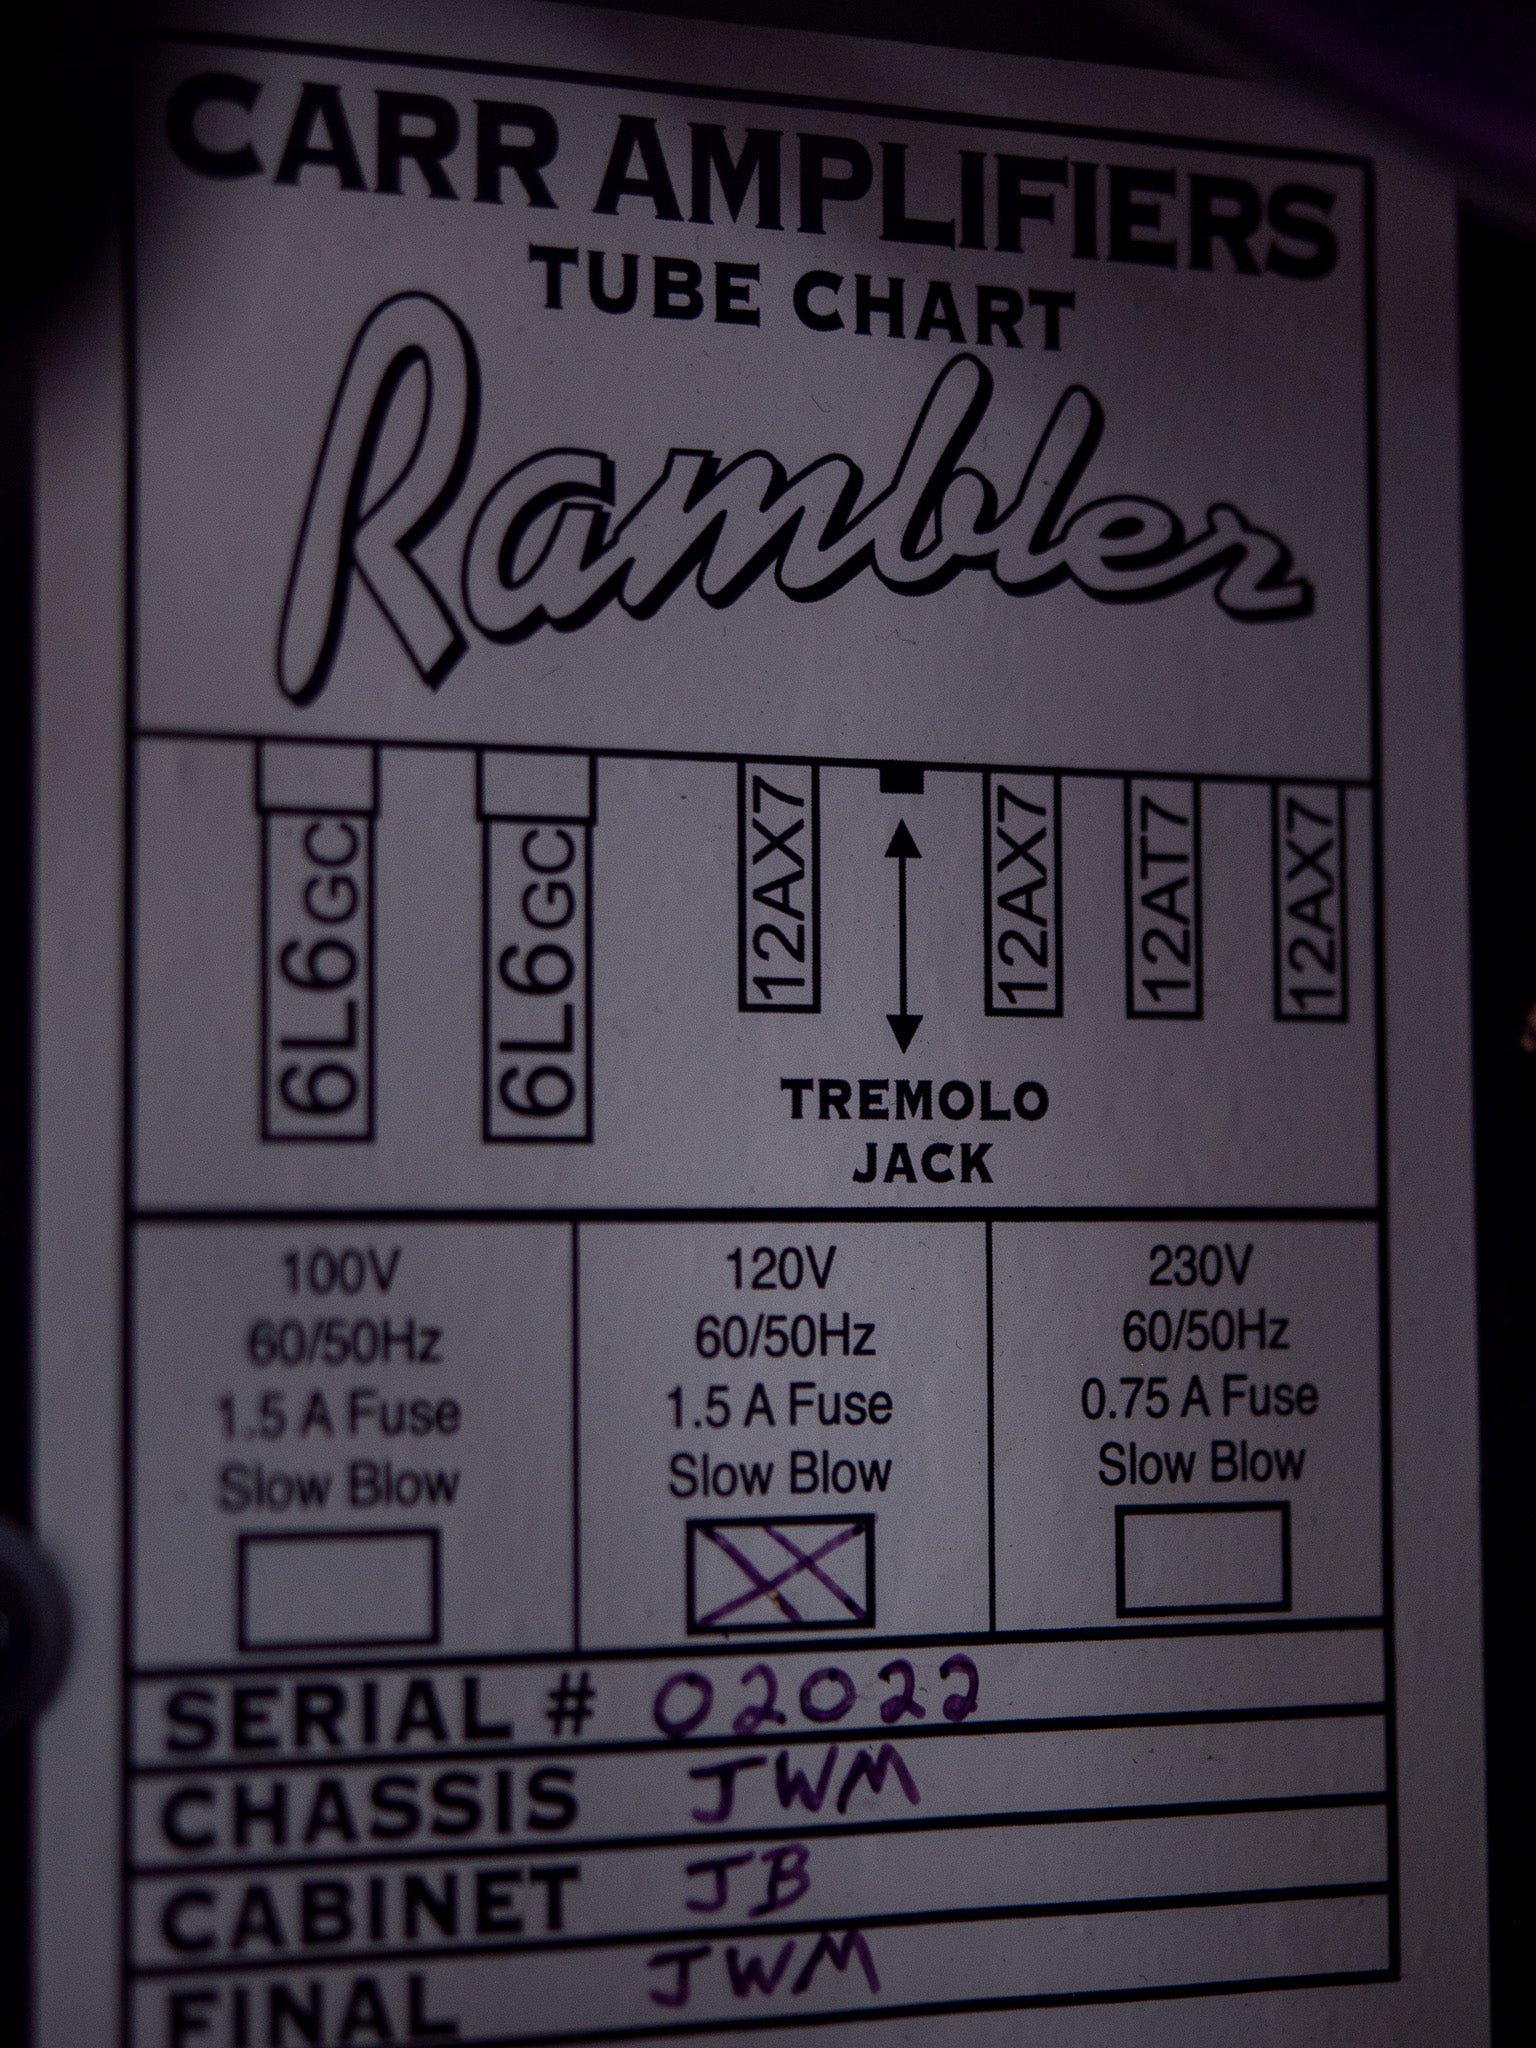 Used Carr Rambler Electric Guitar Amplifier Combo Tube Chart